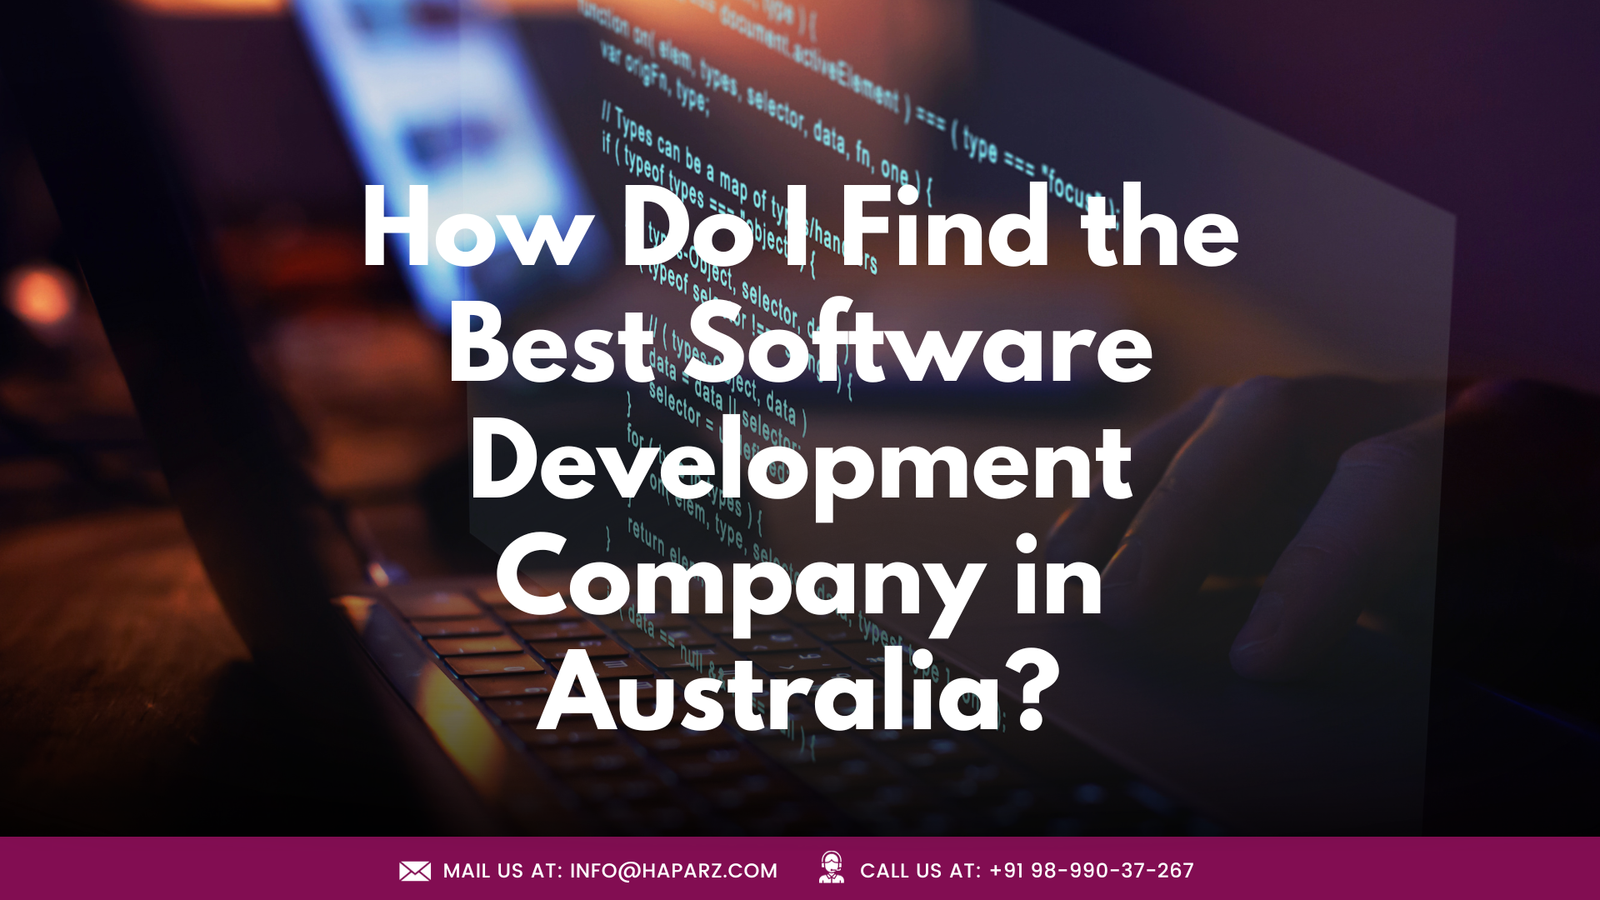 How Do I Find the Best Software Development Company in Australia?